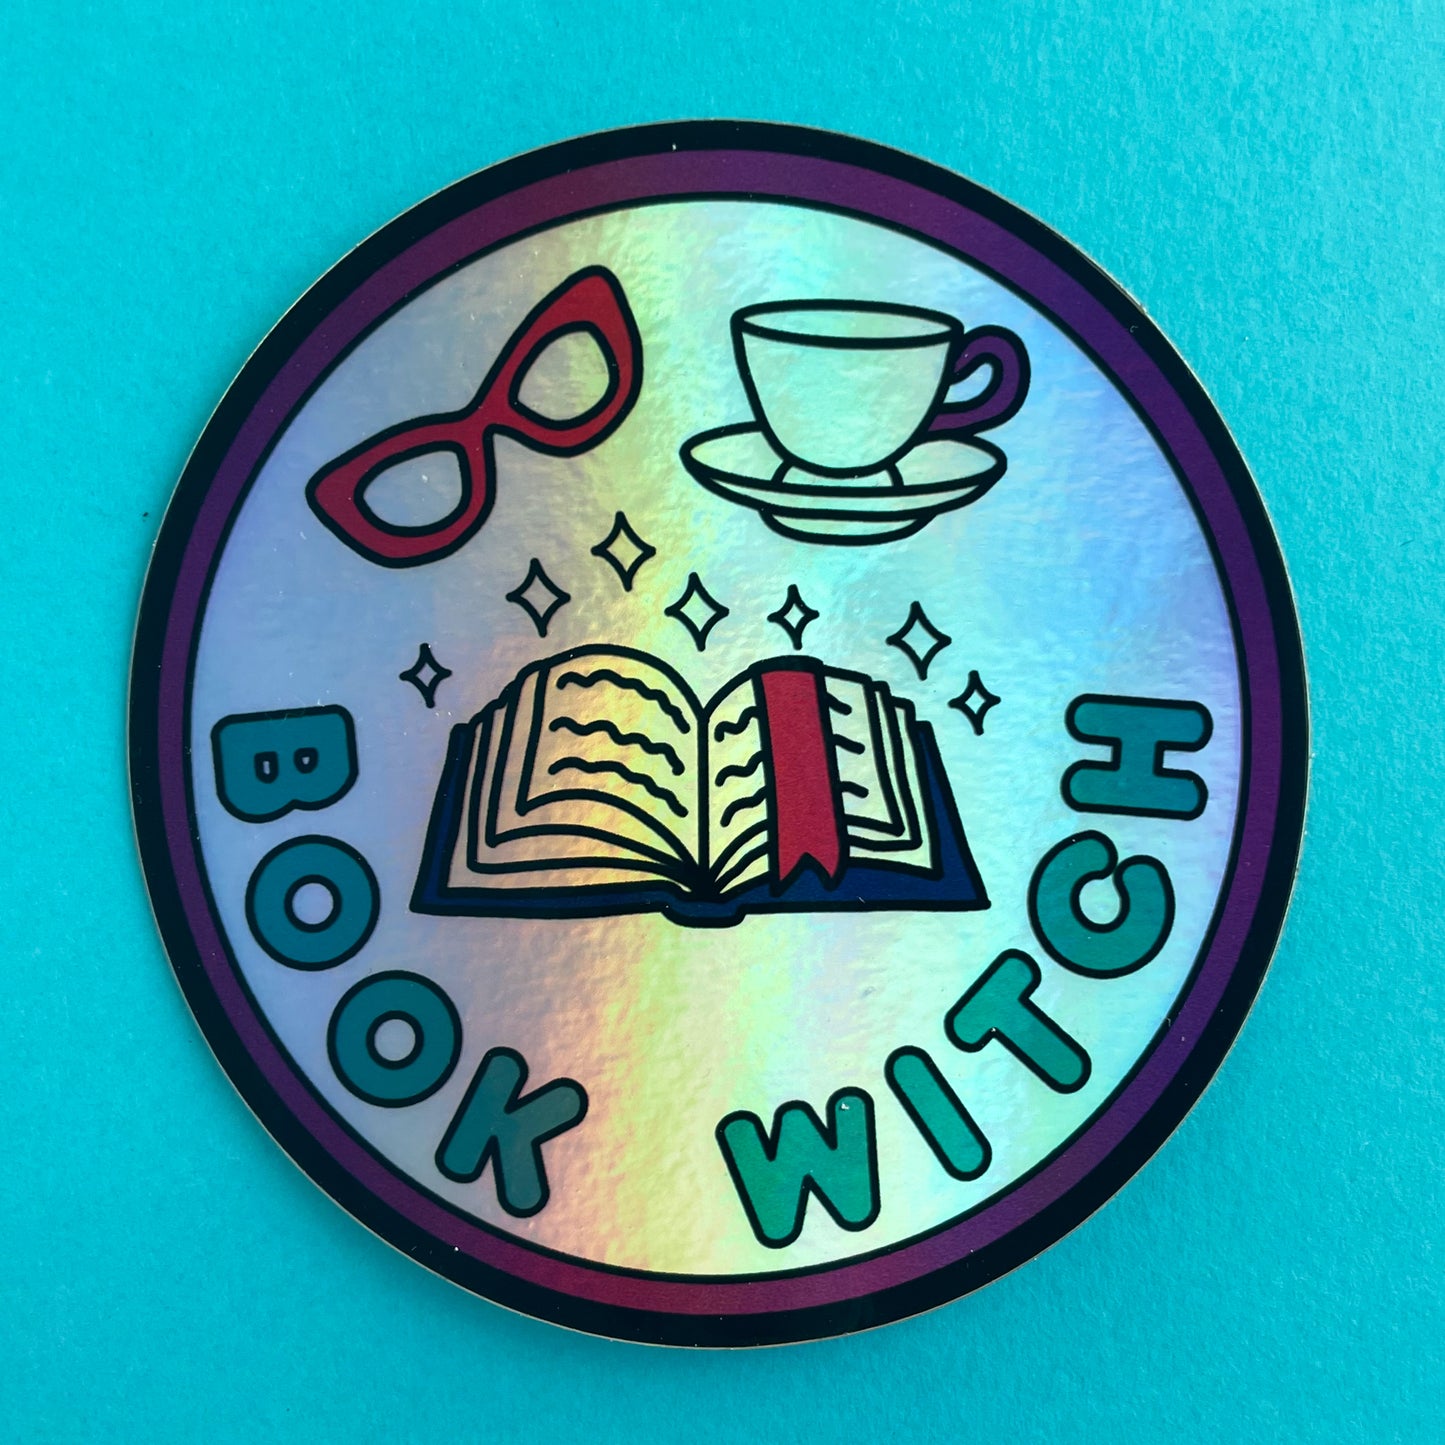 A circular holographic sticker. It has a maroon border with turquoise text that reads "Book Witch". There is an open book, sparkles, red glasses and a teacup above the words.